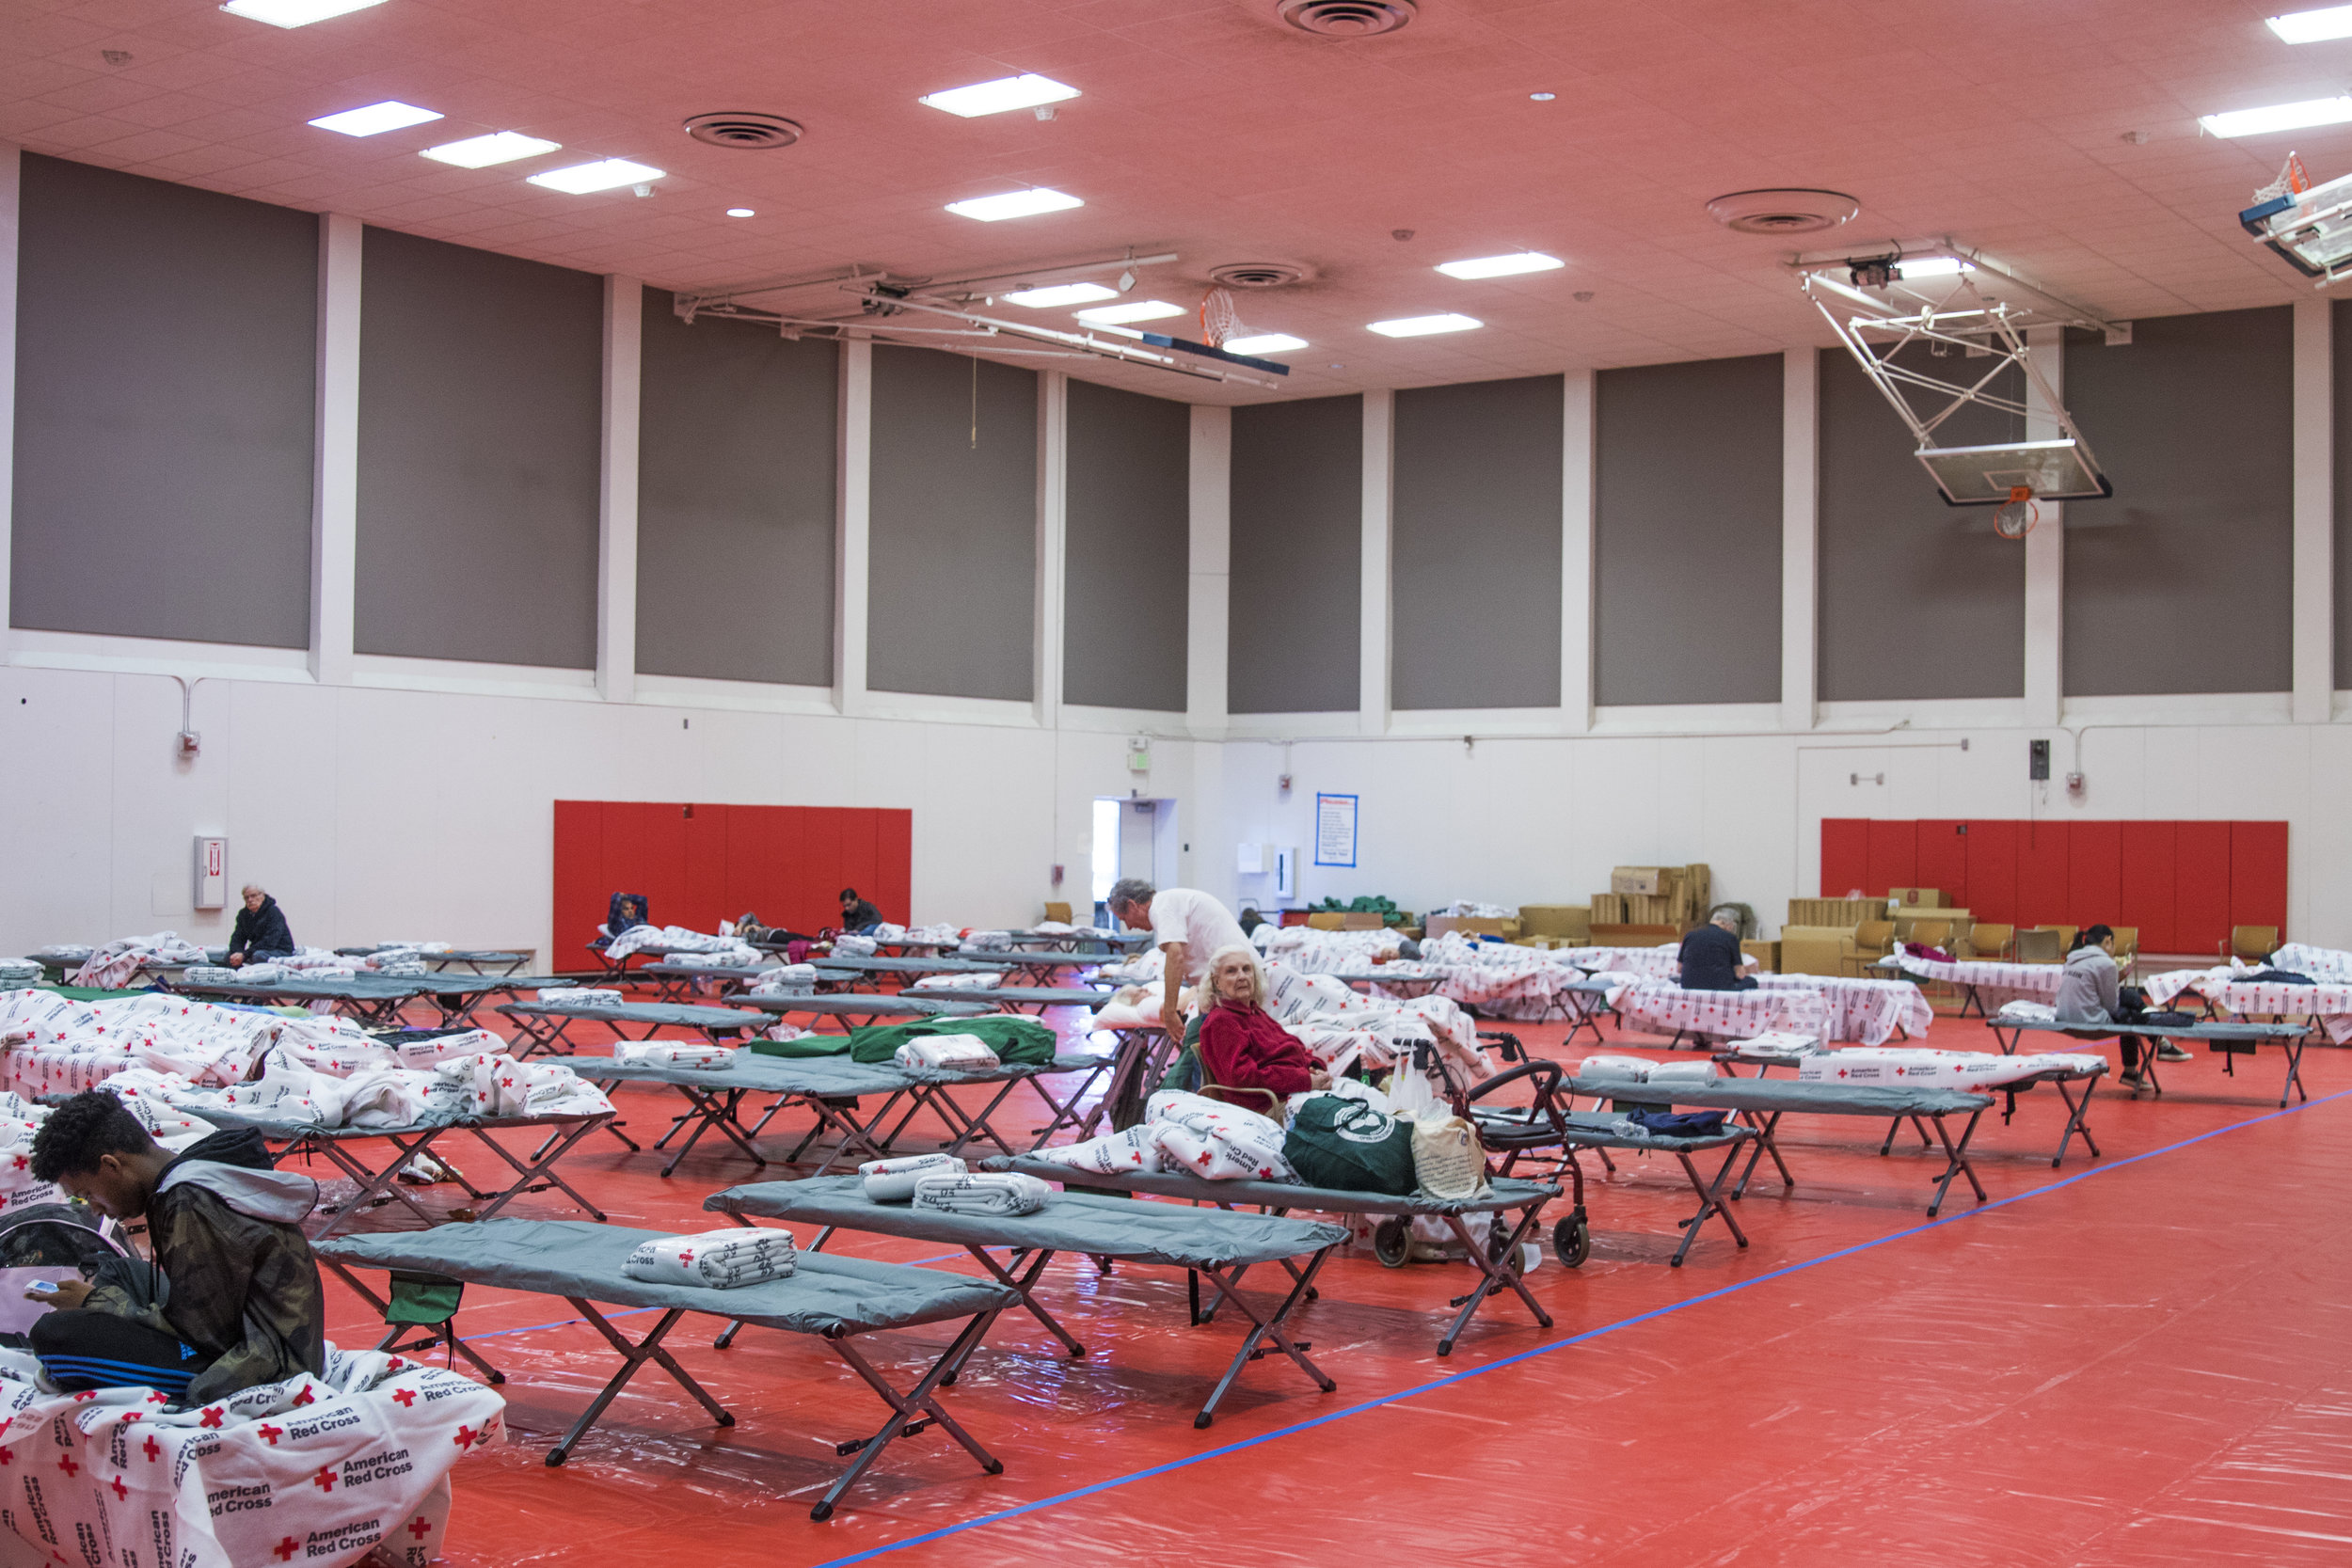  The inside of Pierce College's North Gym has been turned into an evacuation center for people seeking refuge from the Woolsey Fire on November 9, 2018. The college is located in Woodland Hills, California. (Zane Meyer-Thornton/Corsair Photo) 